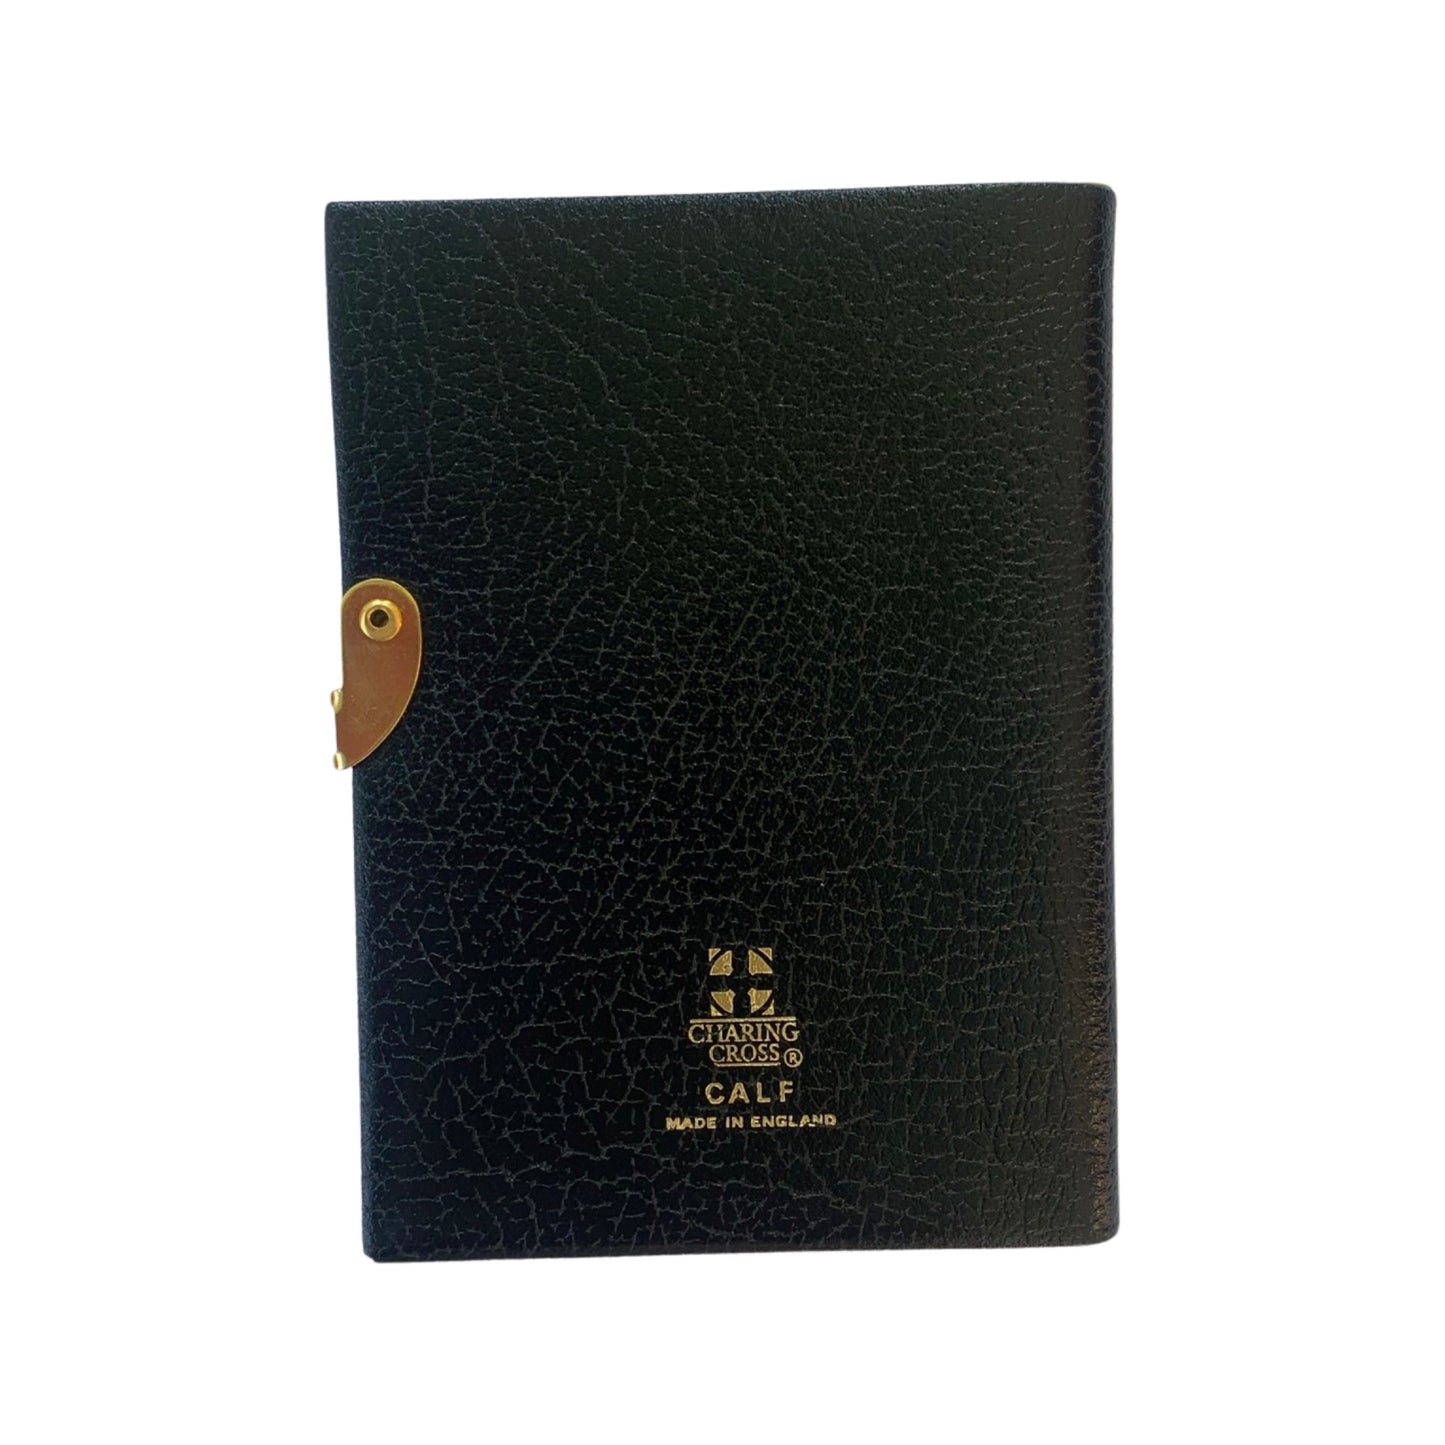 Address Book | Leather Pocket Address Book | 4 by 2.5 inches | Embossed Buffalo Calf | Pencil, Clip, and Gold Corners | Charing Cross | No. A42CAJC